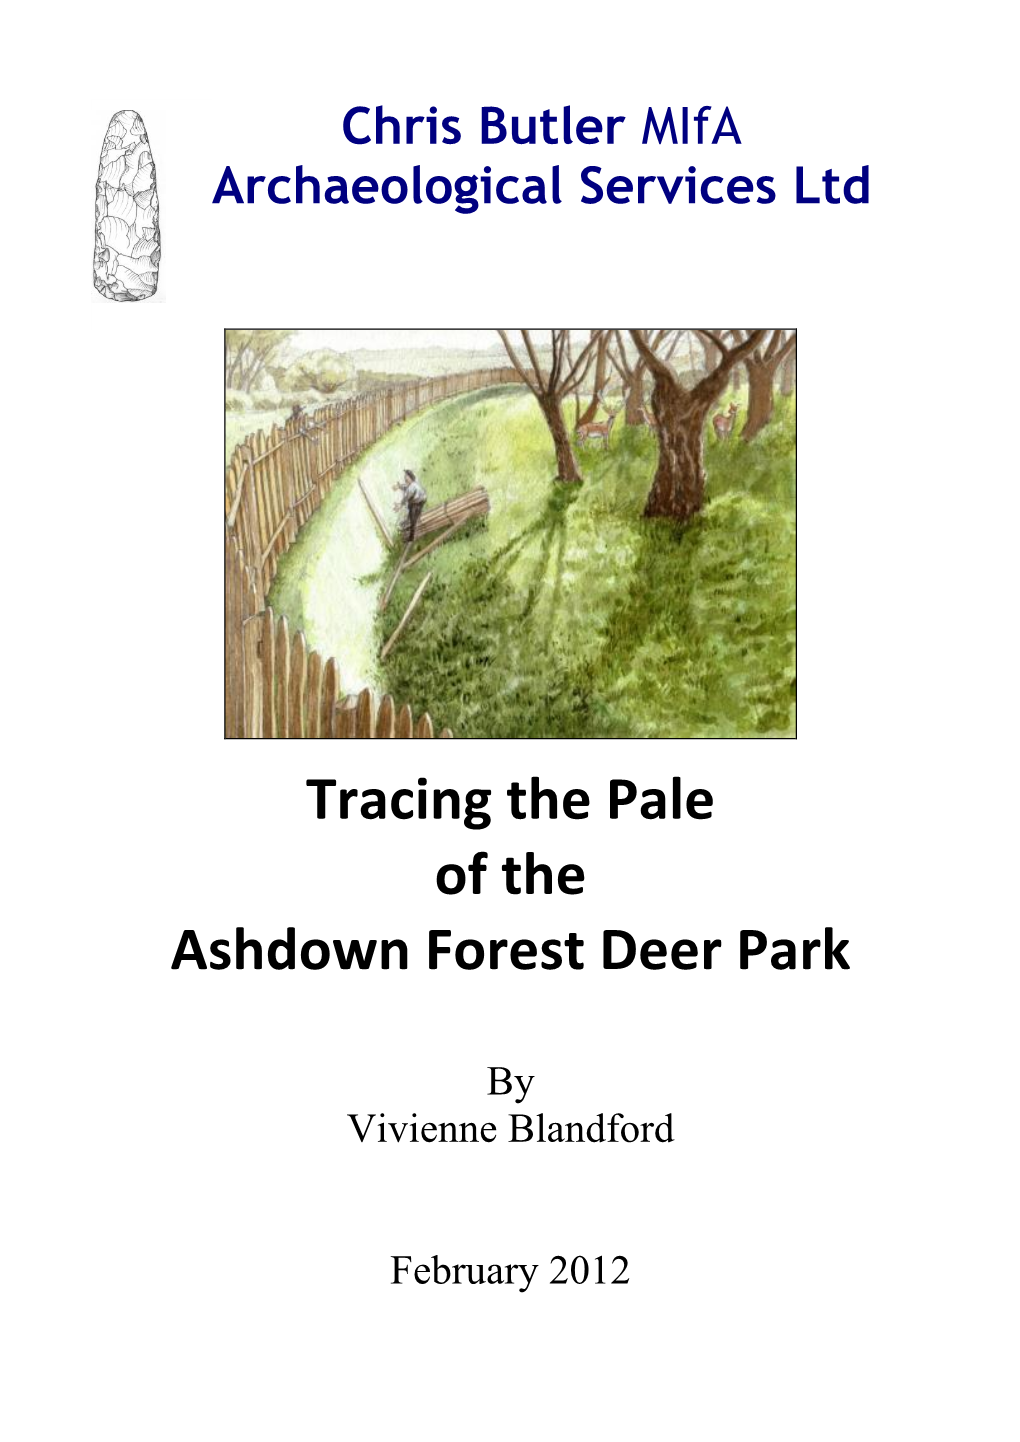 Tracing the Pale of the Ashdown Forest Deer Park